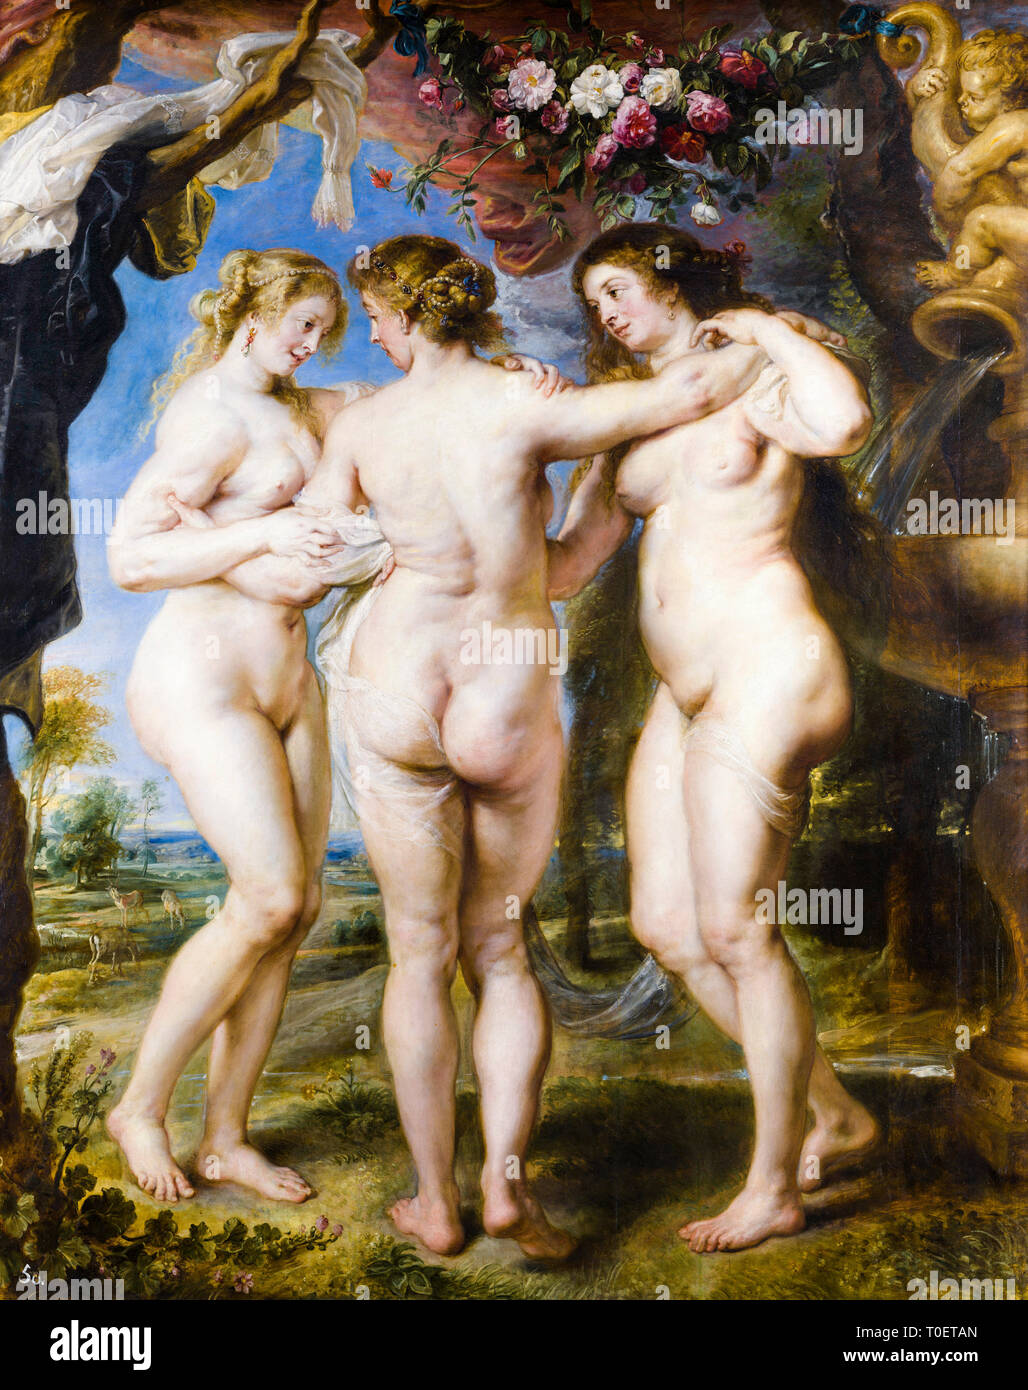 The Three Graces, Rubens. Baroque painting by Peter Paul Rubens, 1635 Stock Photo